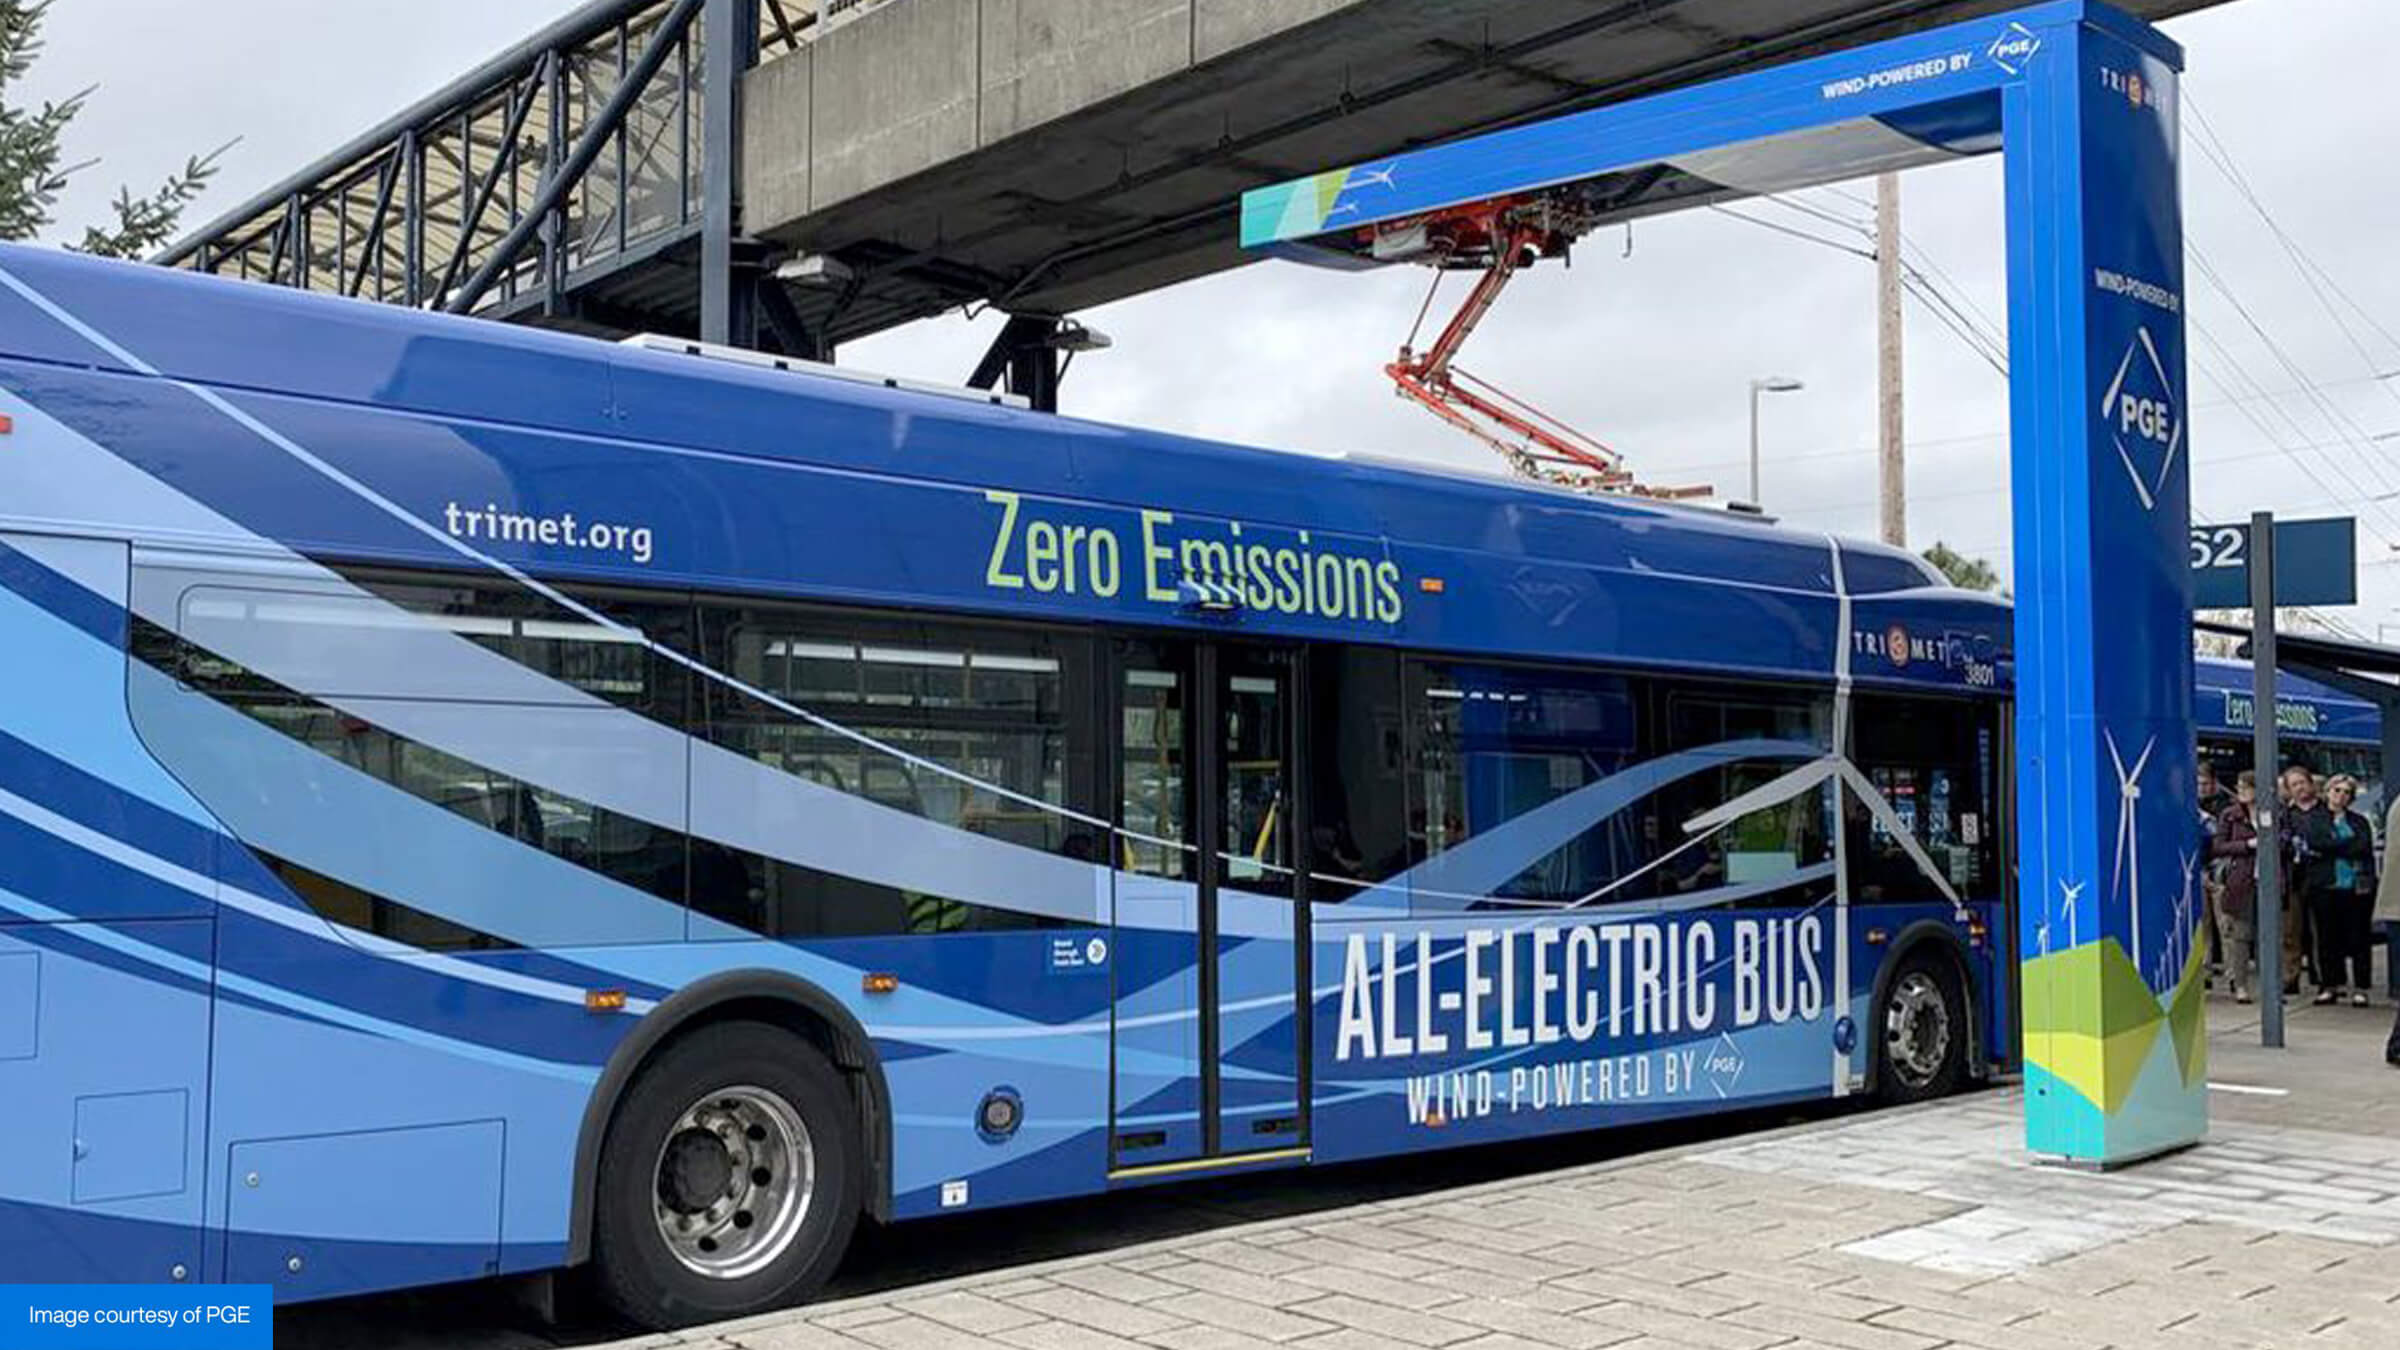 Portland General Electric ad campaign public transit bus and charging station